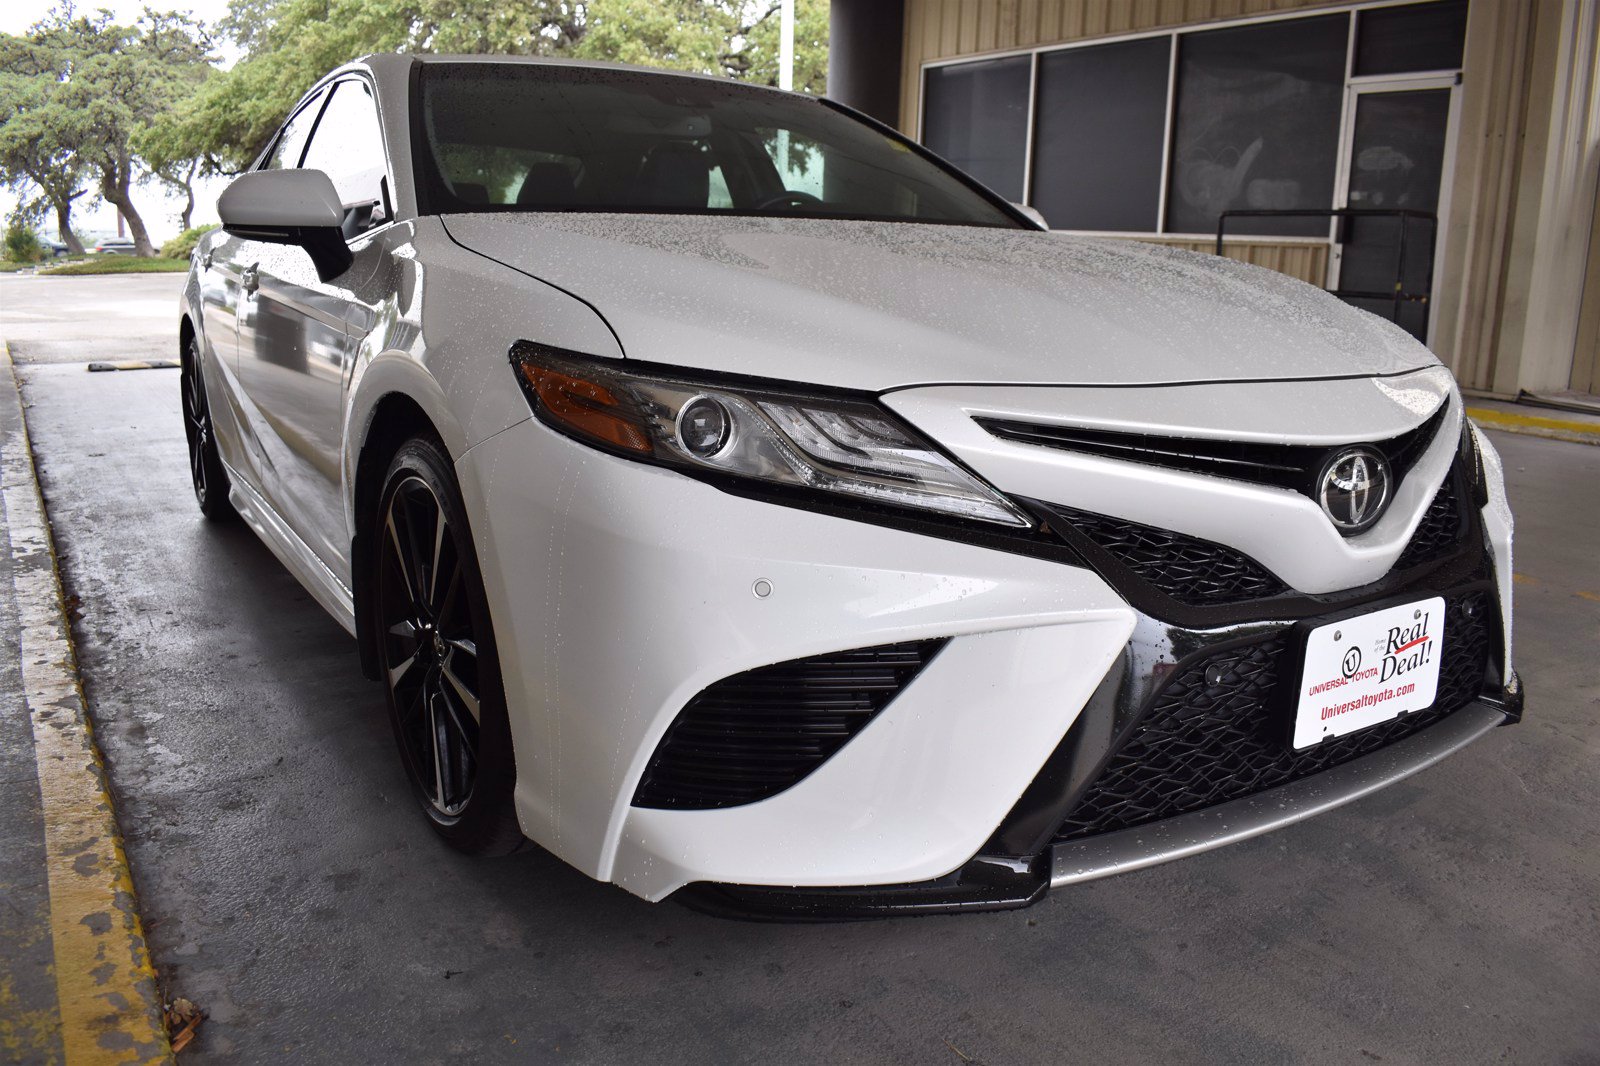 Pre-Owned 2018 Toyota Camry XSE 4dr Car in San Antonio #203321B | Red McCombs Automotive